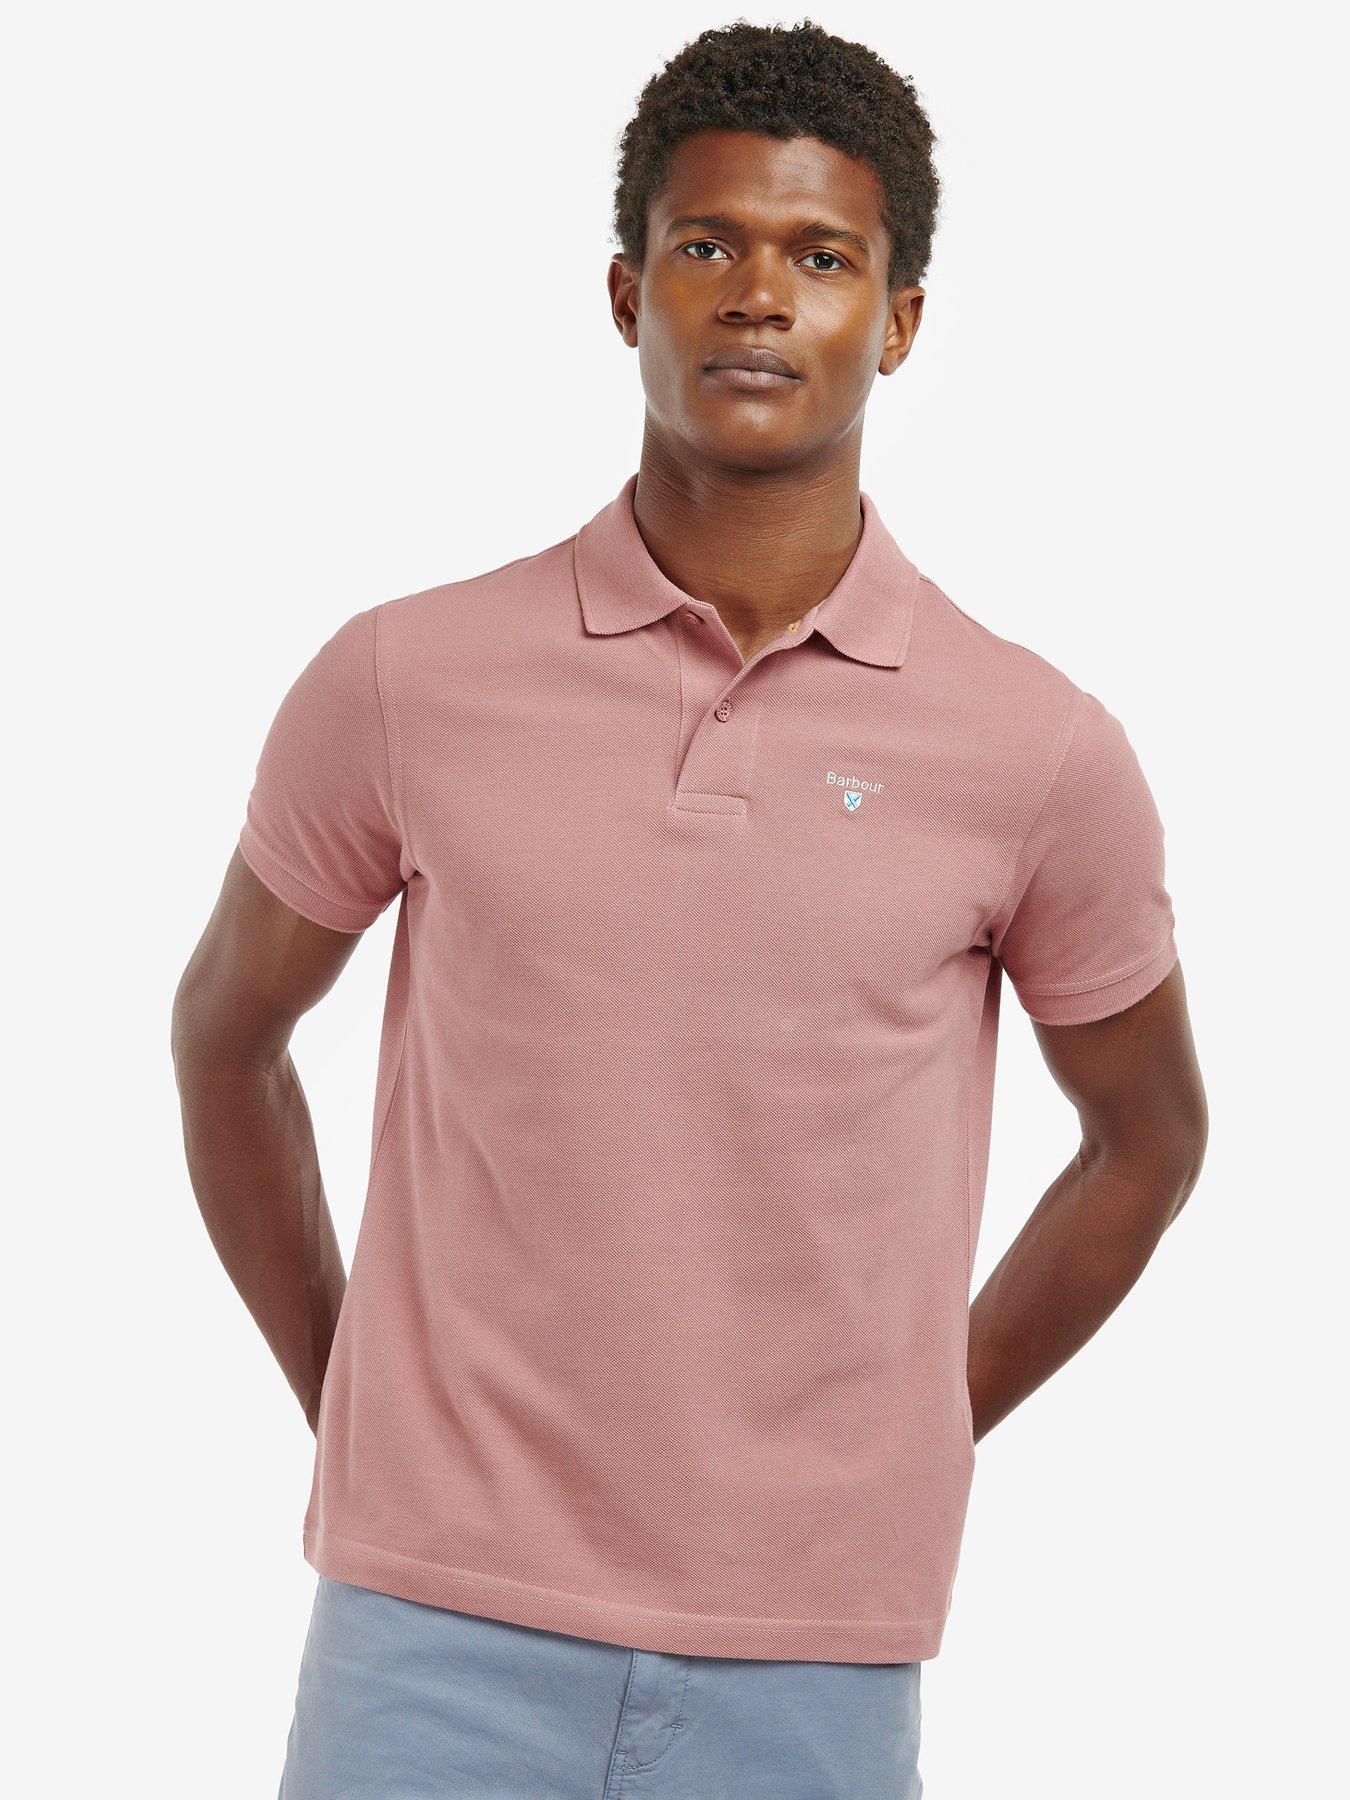 Barbour Shirt - Sports Pink Polo